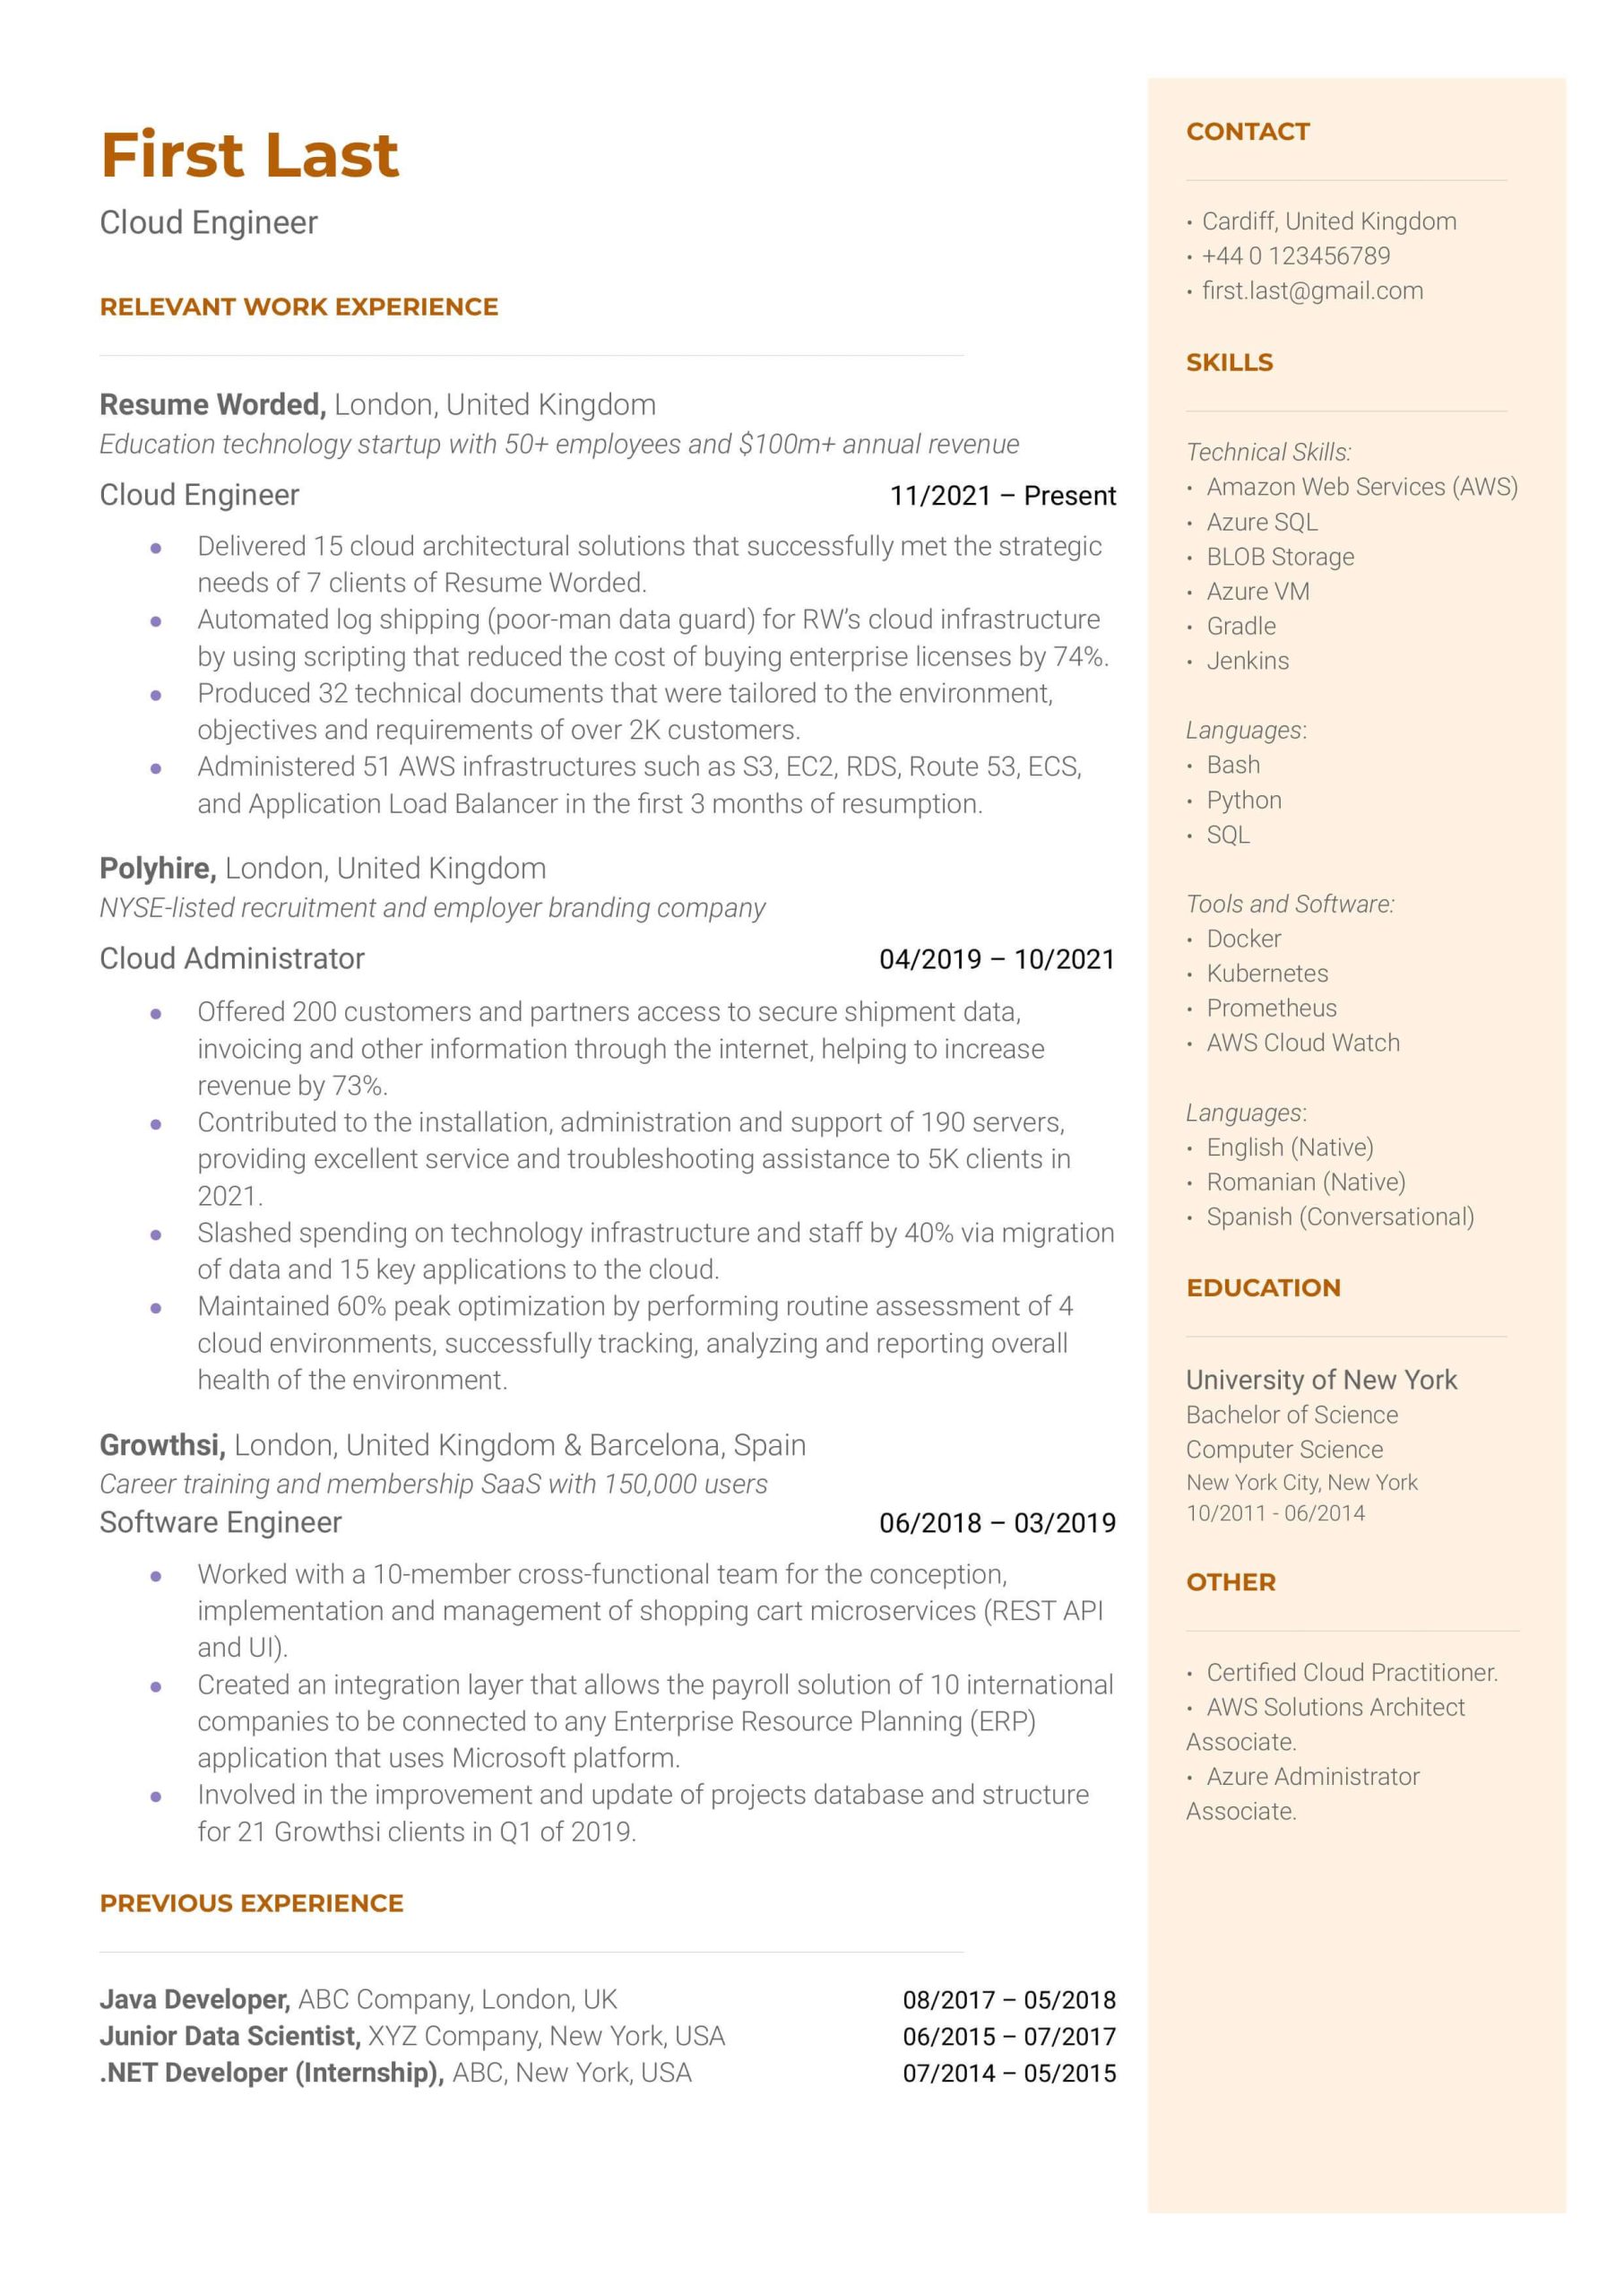 Sample Resume with Comp Tia Credentials 4 Desktop Support Resume Examples for 2022 Resume Worded